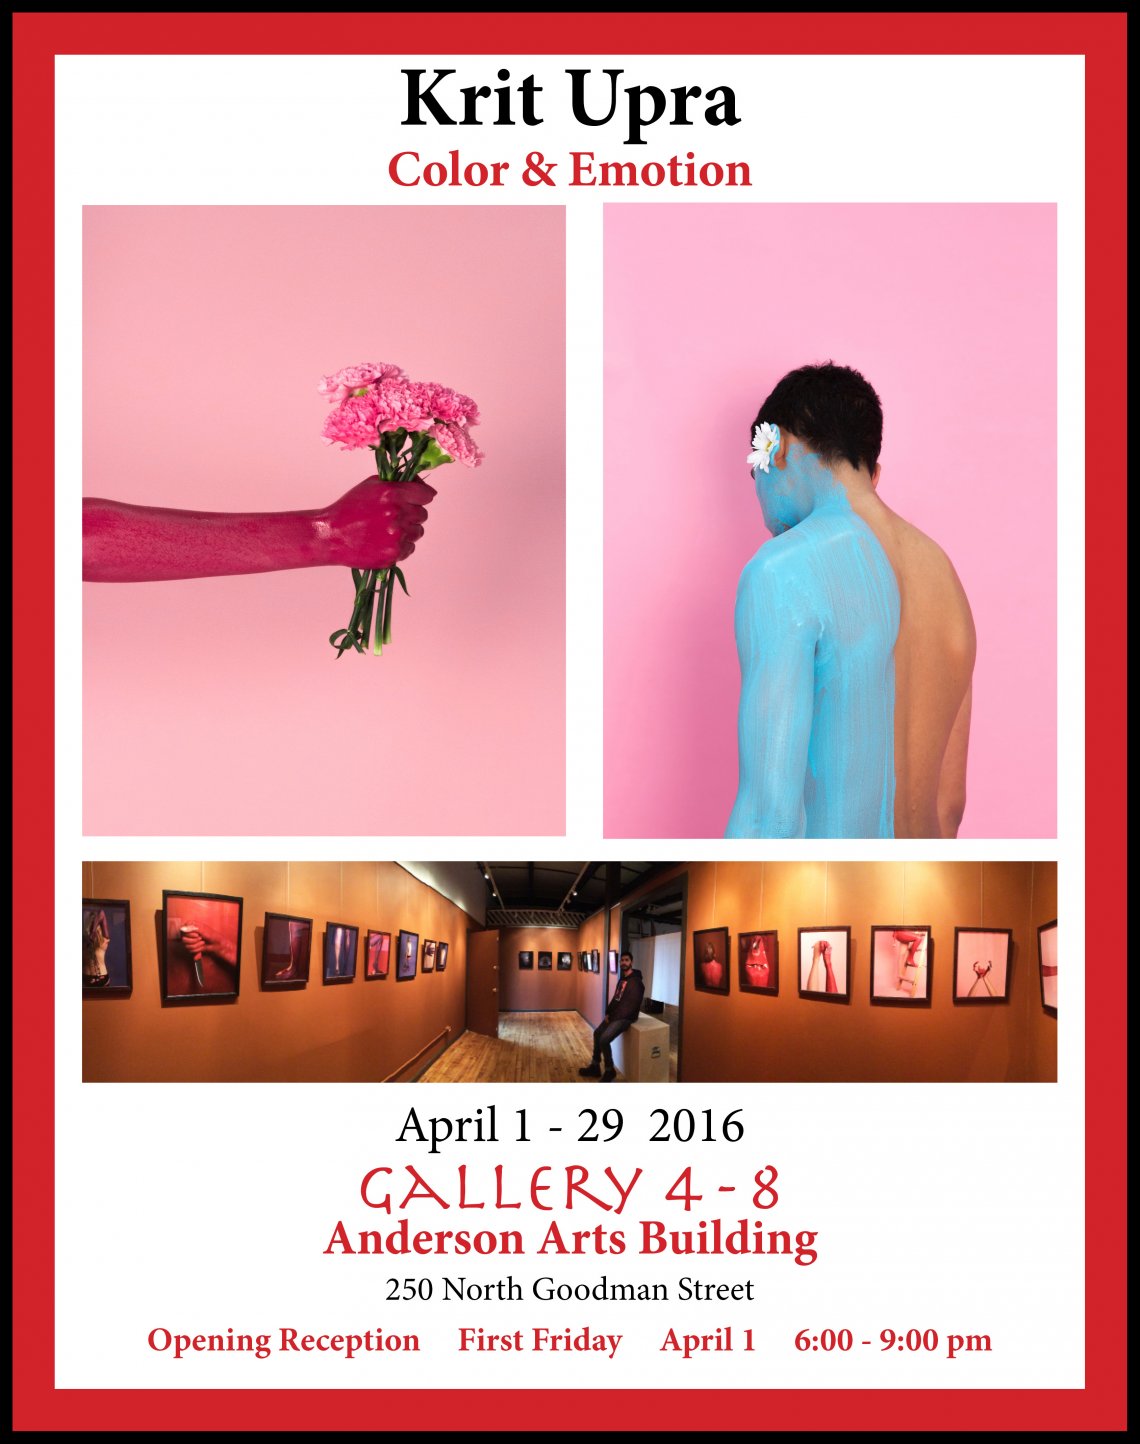 Krit Upra—Color & Emotion | April 1–29, 2016 |  Gallery 4 -  8 | Anderson Arts Building | 250 North Goodman Street | Opening Reception First Friday April 1 6:00–9:00 pm